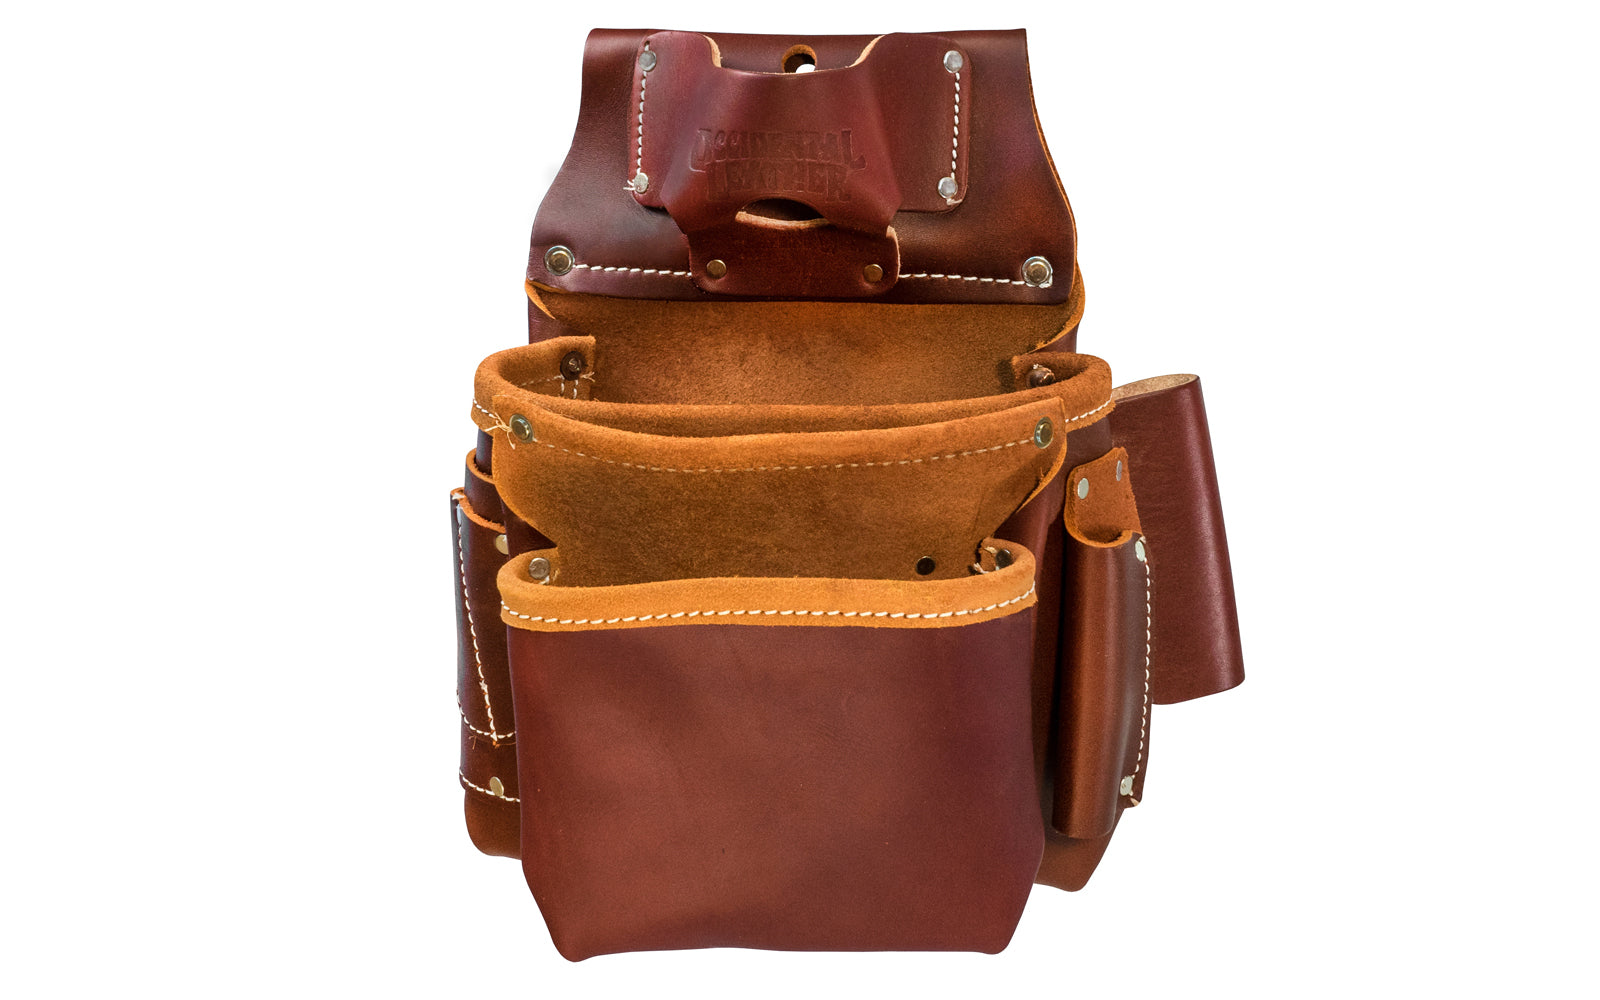 Occidental Leather 2-Pouch "Pro Fastener" Bag with Tape Pocket ~ 5061 - Fits 3" work belt - 9 total pockets & tool holders - Genuine leather - Made in USA - 759244009101 - Fastener Bags hold tools & fasteners often accessed with the left hand (nail sets, tri-square, cat's paw, driver bits, angle square - Two Pouch Bag